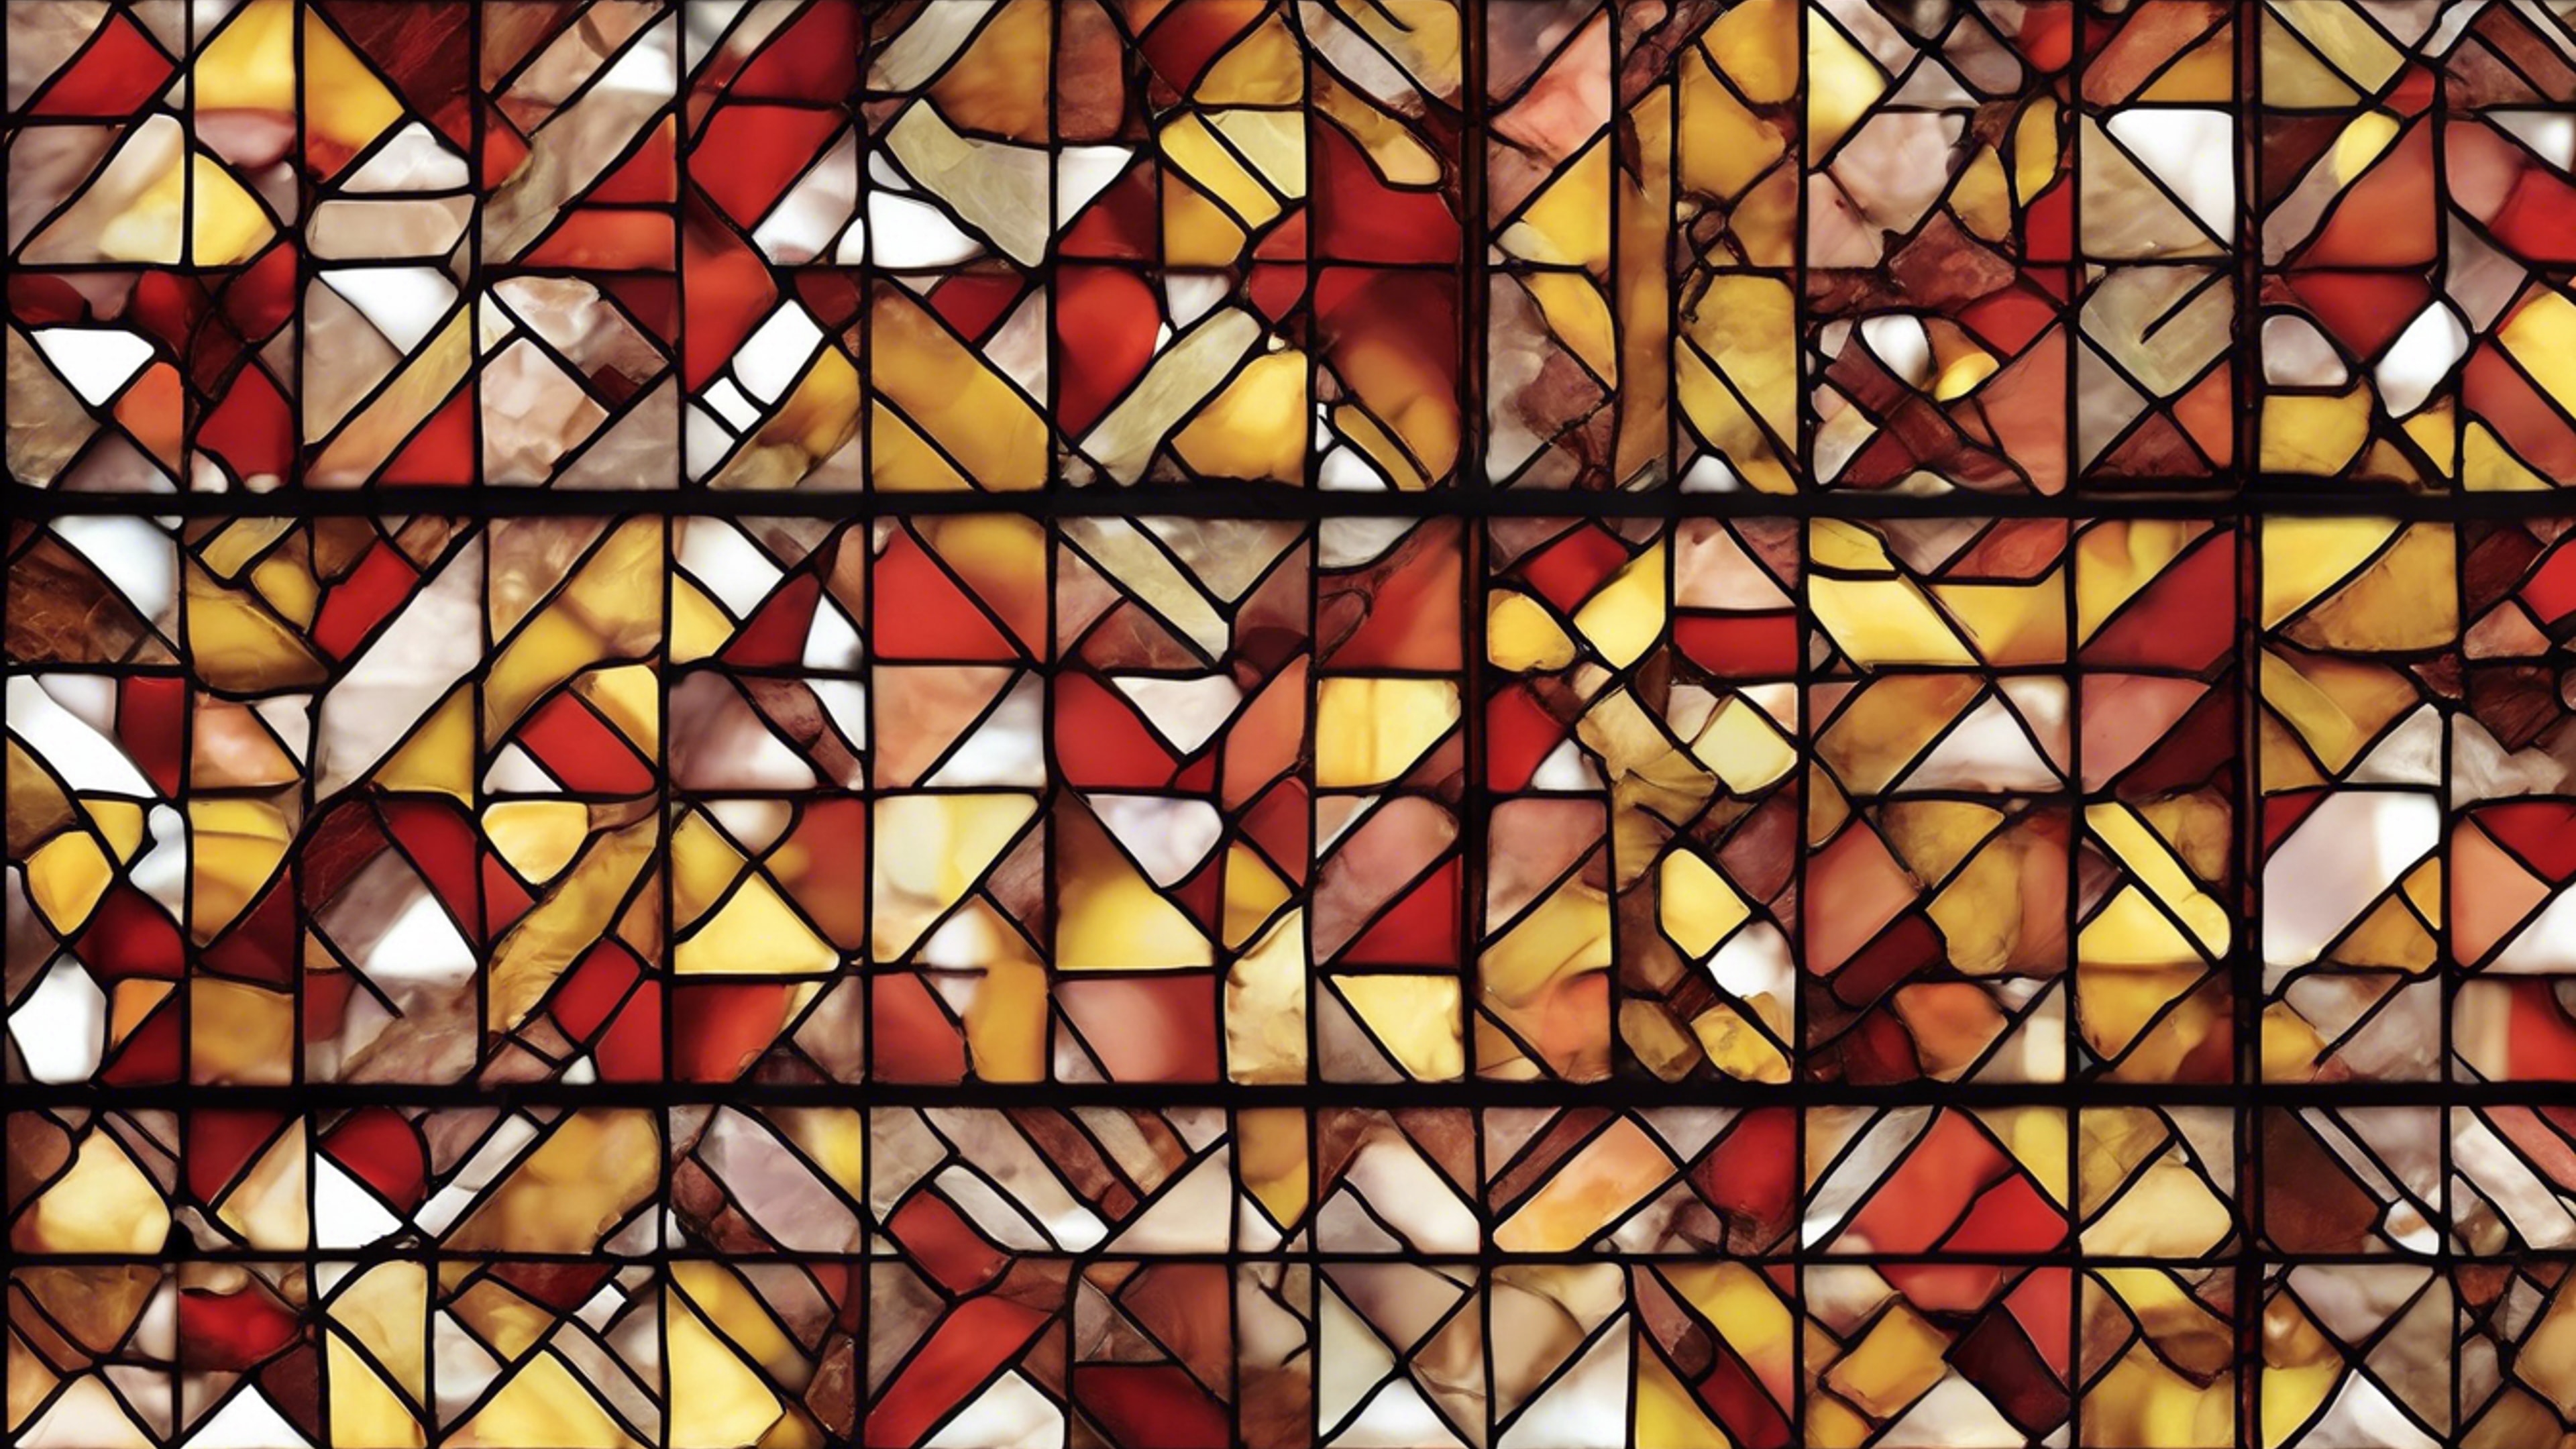 A stained glass design using a repeating motif of red and yellow bricks. Kertas dinding[d98aa8b1ebac46789cc9]